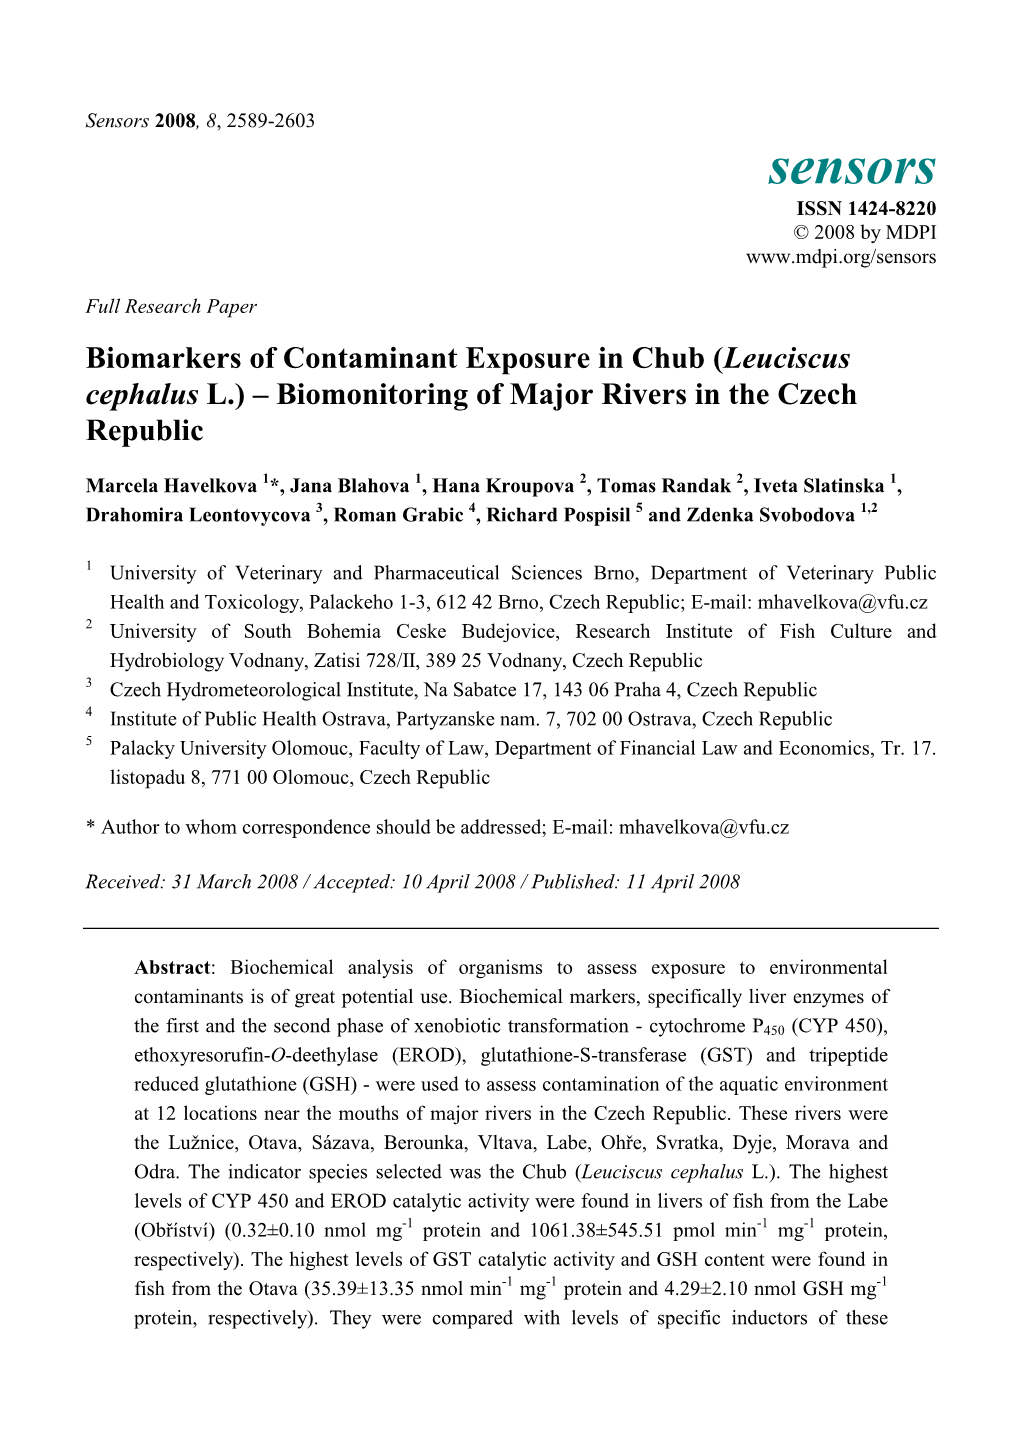 Biomarkers of Contaminant Exposure in Chub (Leuciscus Cephalus L.) Œ Biomonitoring of Major Rivers in the Czech Republic